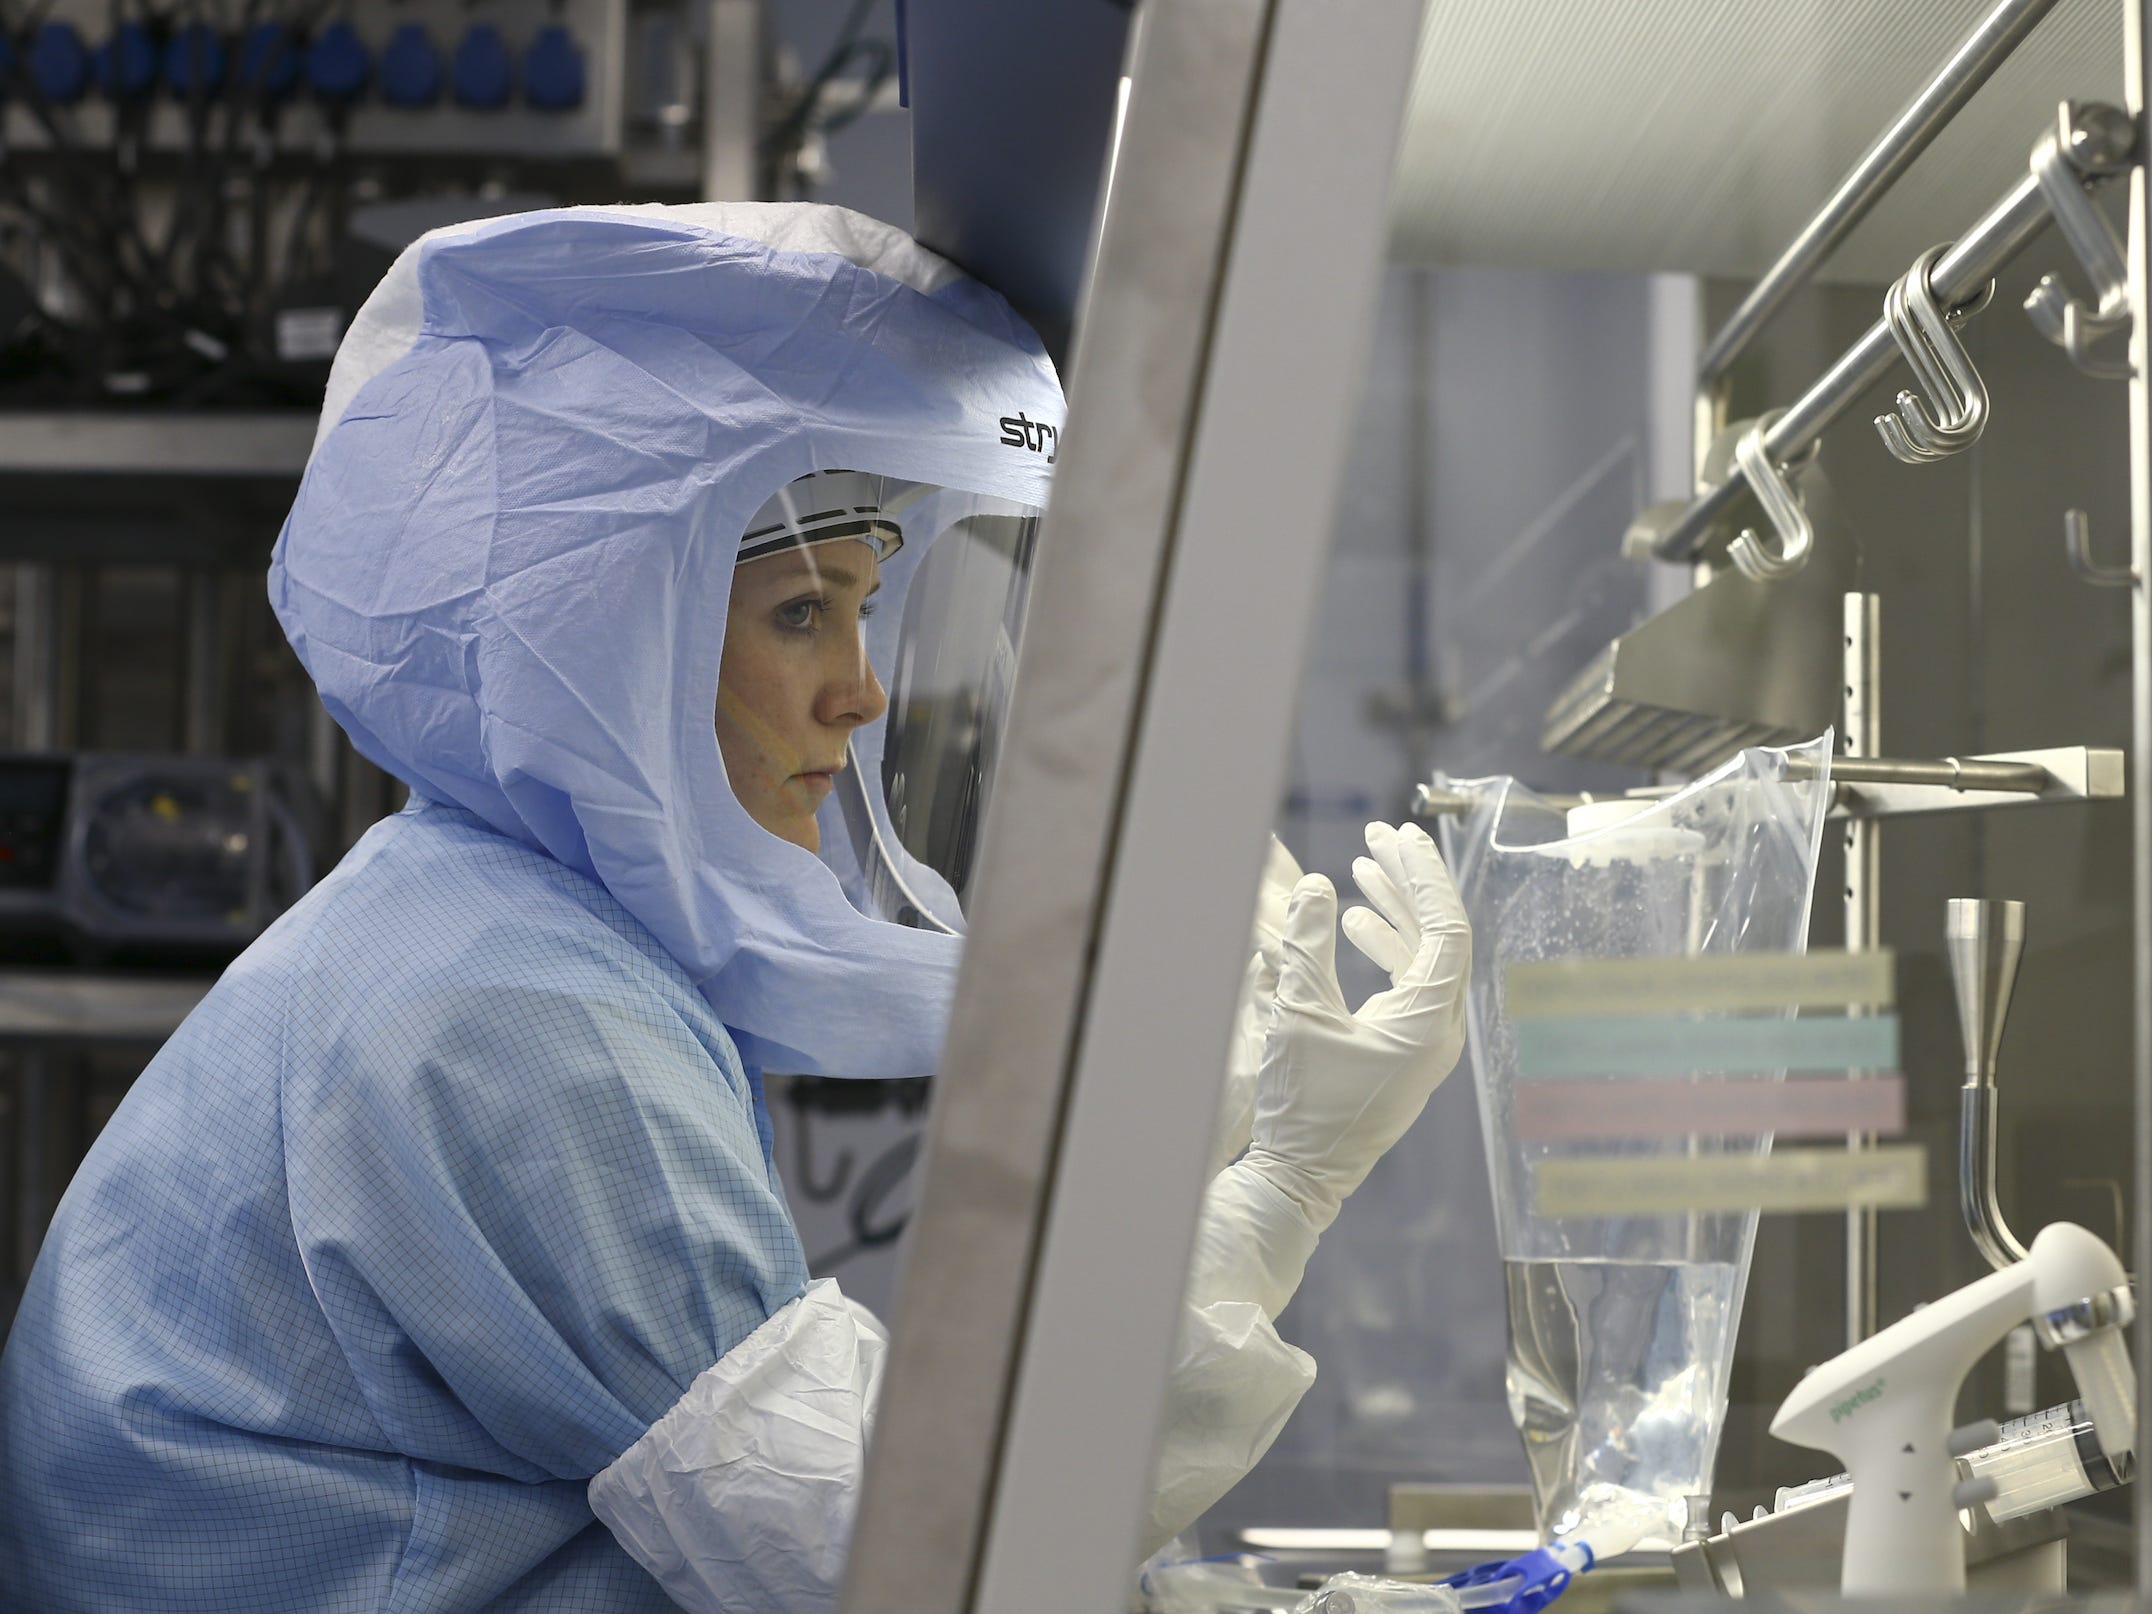 A person in a light-blue protective suit and helmet with face mask near laboratory equipment.